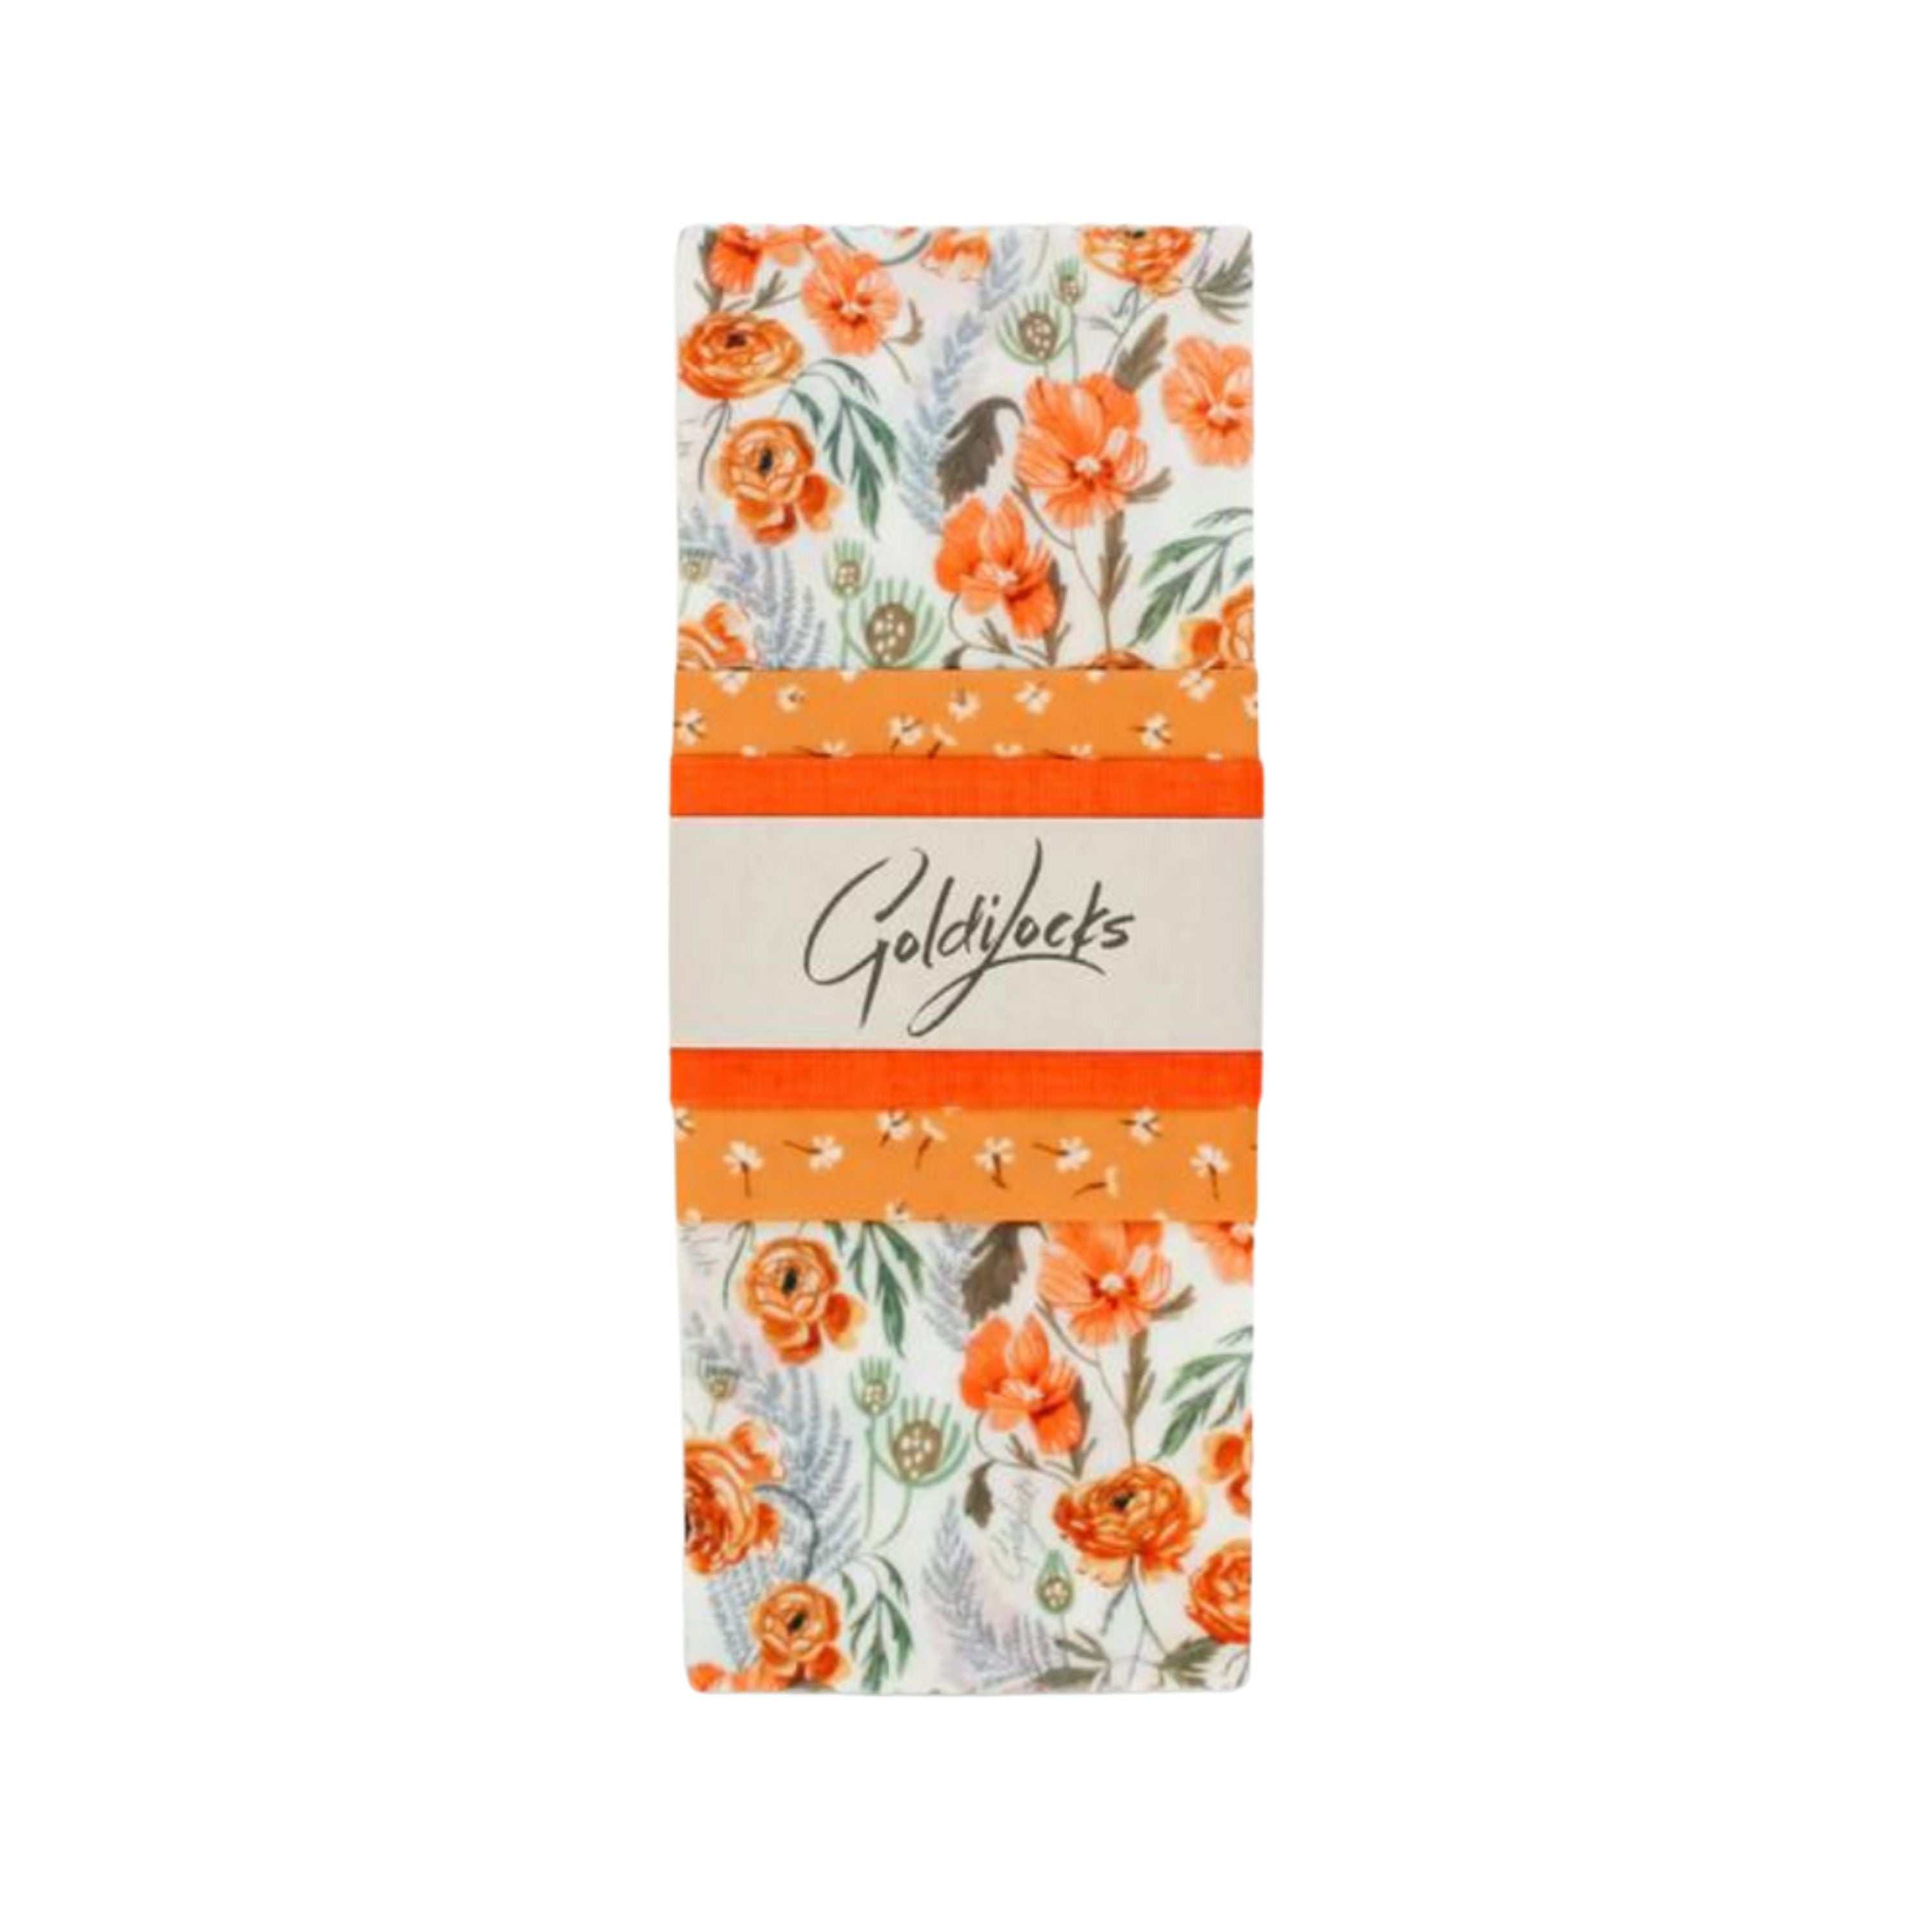 Beeswax Food Wraps - Golden Floral